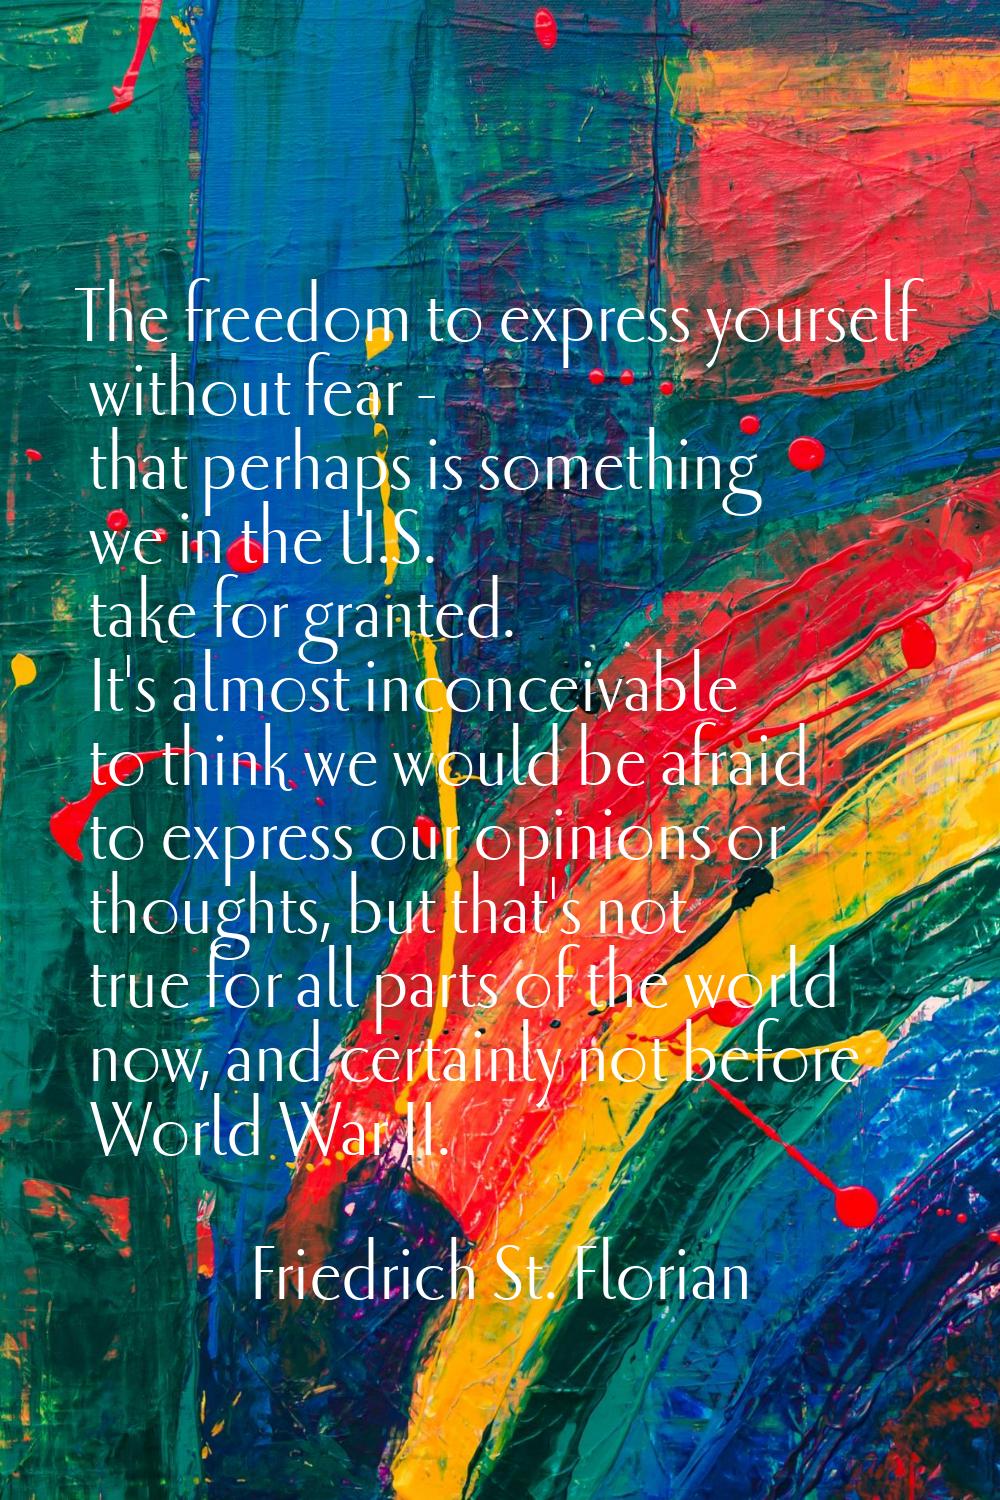 The freedom to express yourself without fear - that perhaps is something we in the U.S. take for gr